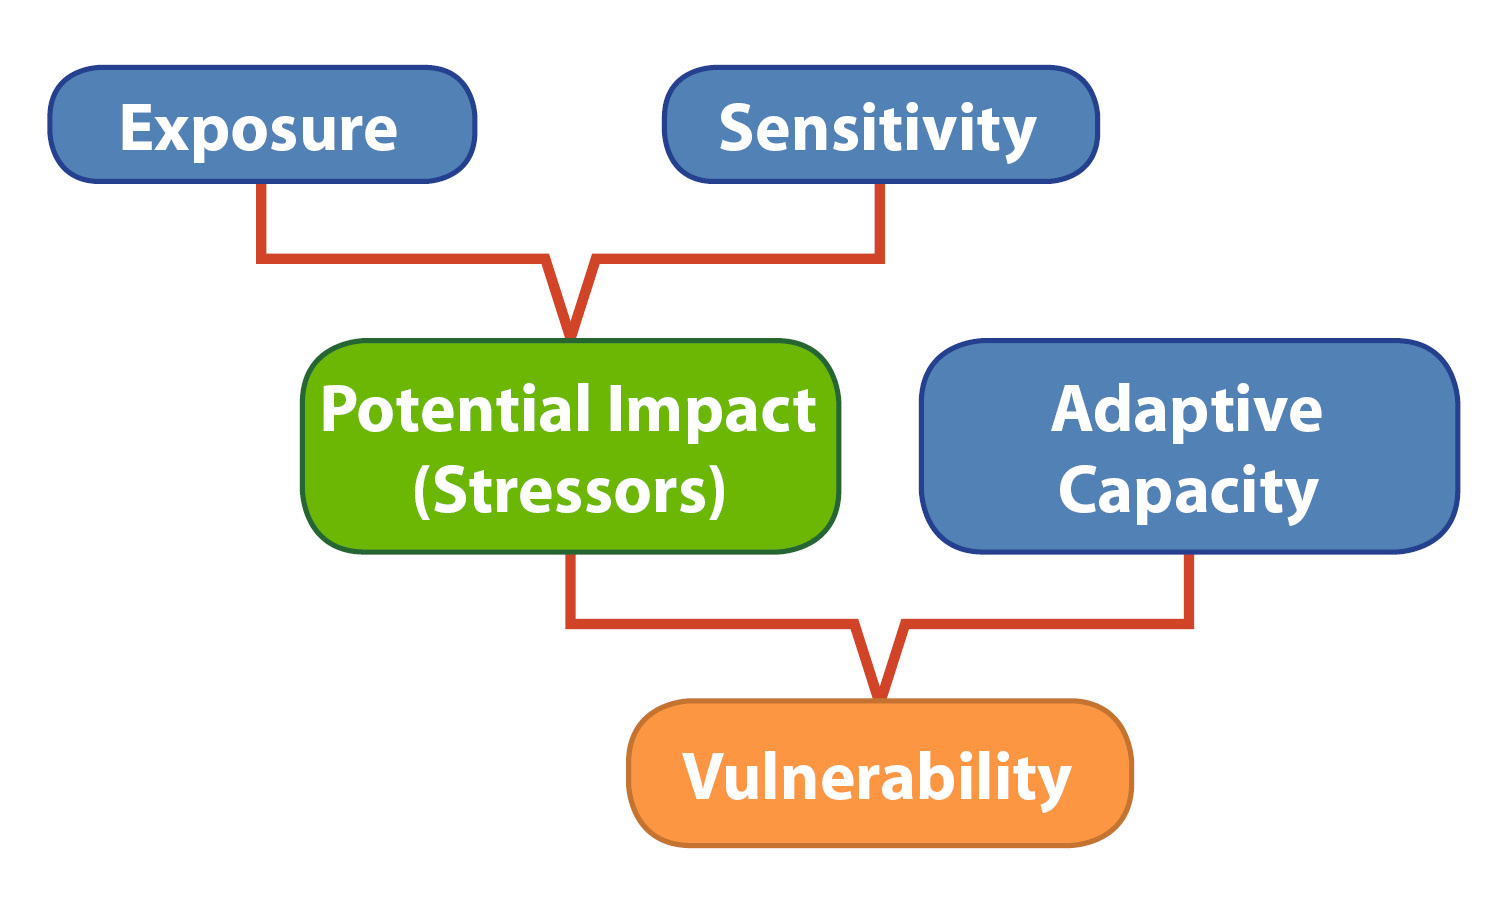 A flow chart showing the relationship between exposure, sensitivity, potential impact (stressors), adaptive capacity and vulnerability.